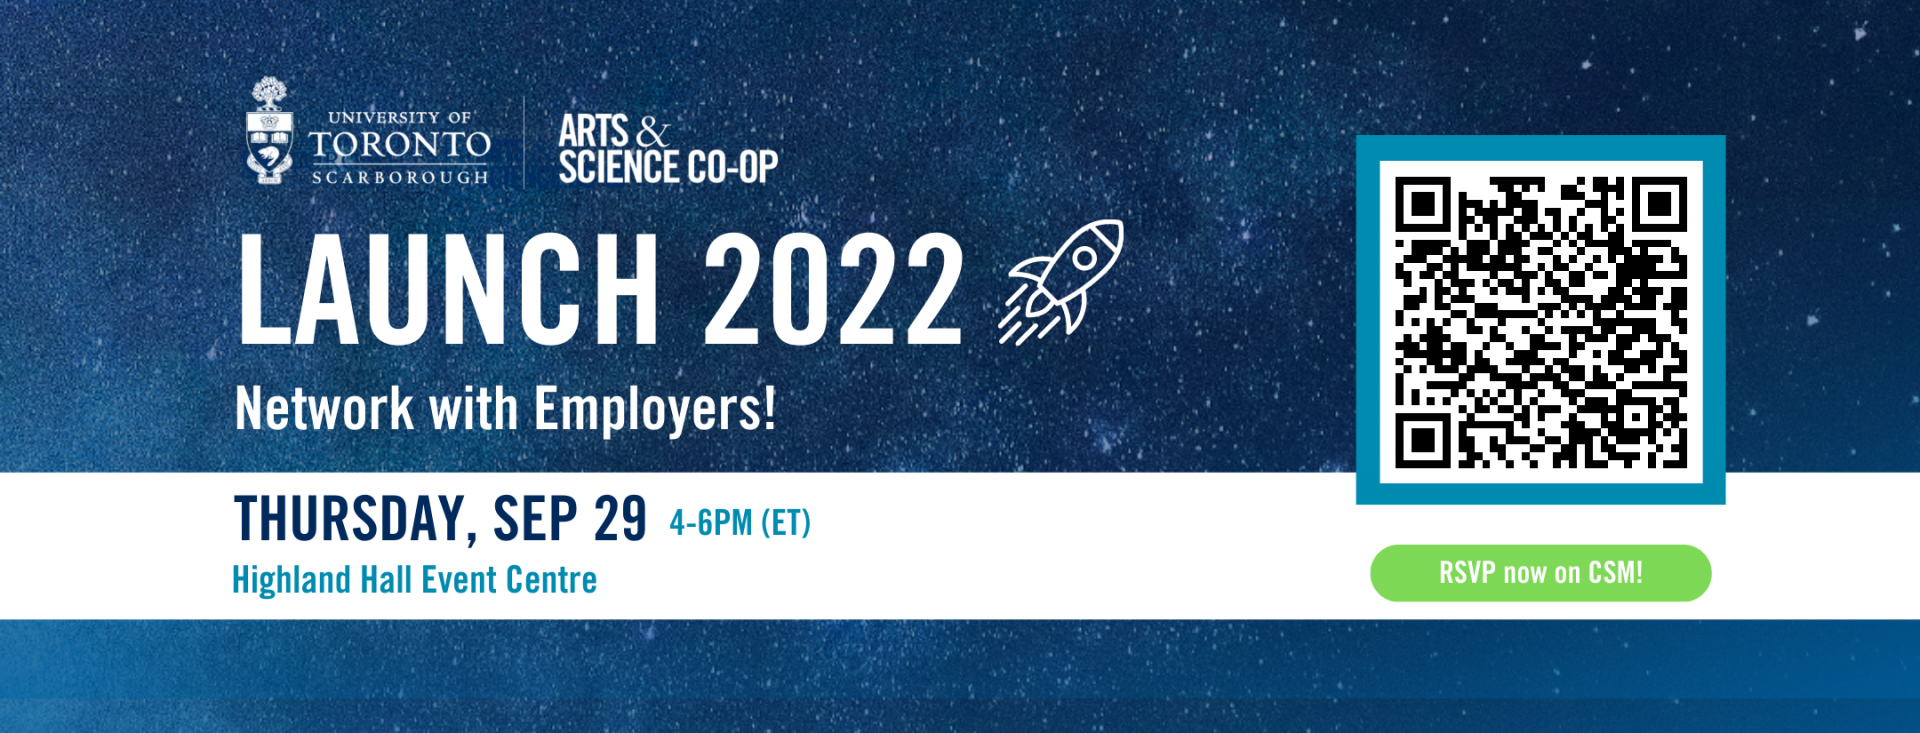 Launch 2022. Register with Employers!